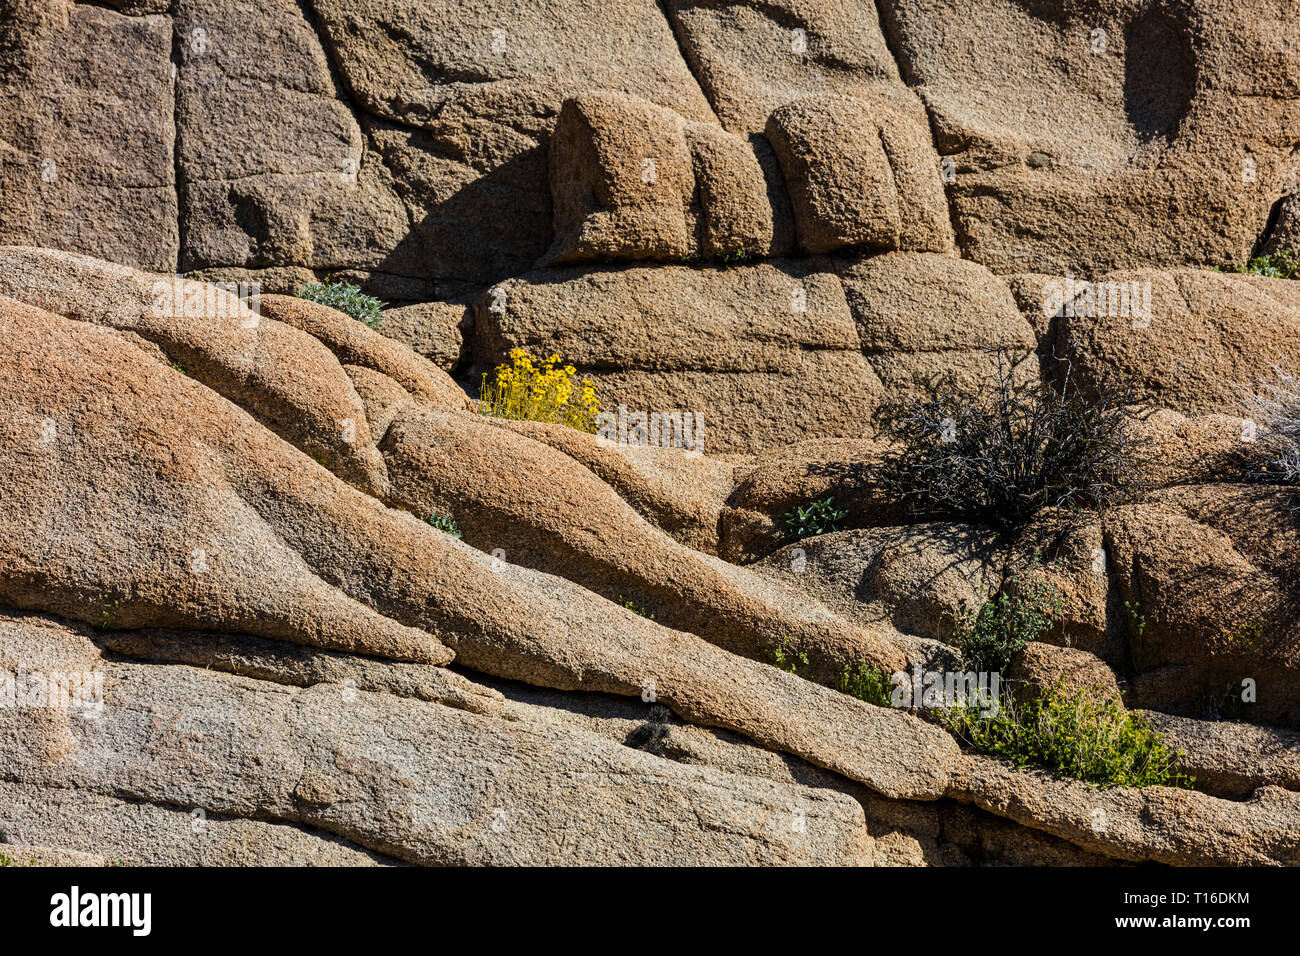 The hike to Lost Palms Oasis has many increible rock formations  - JOSHUA TREE NATIONAL PARK, CALIFORNIA Stock Photo